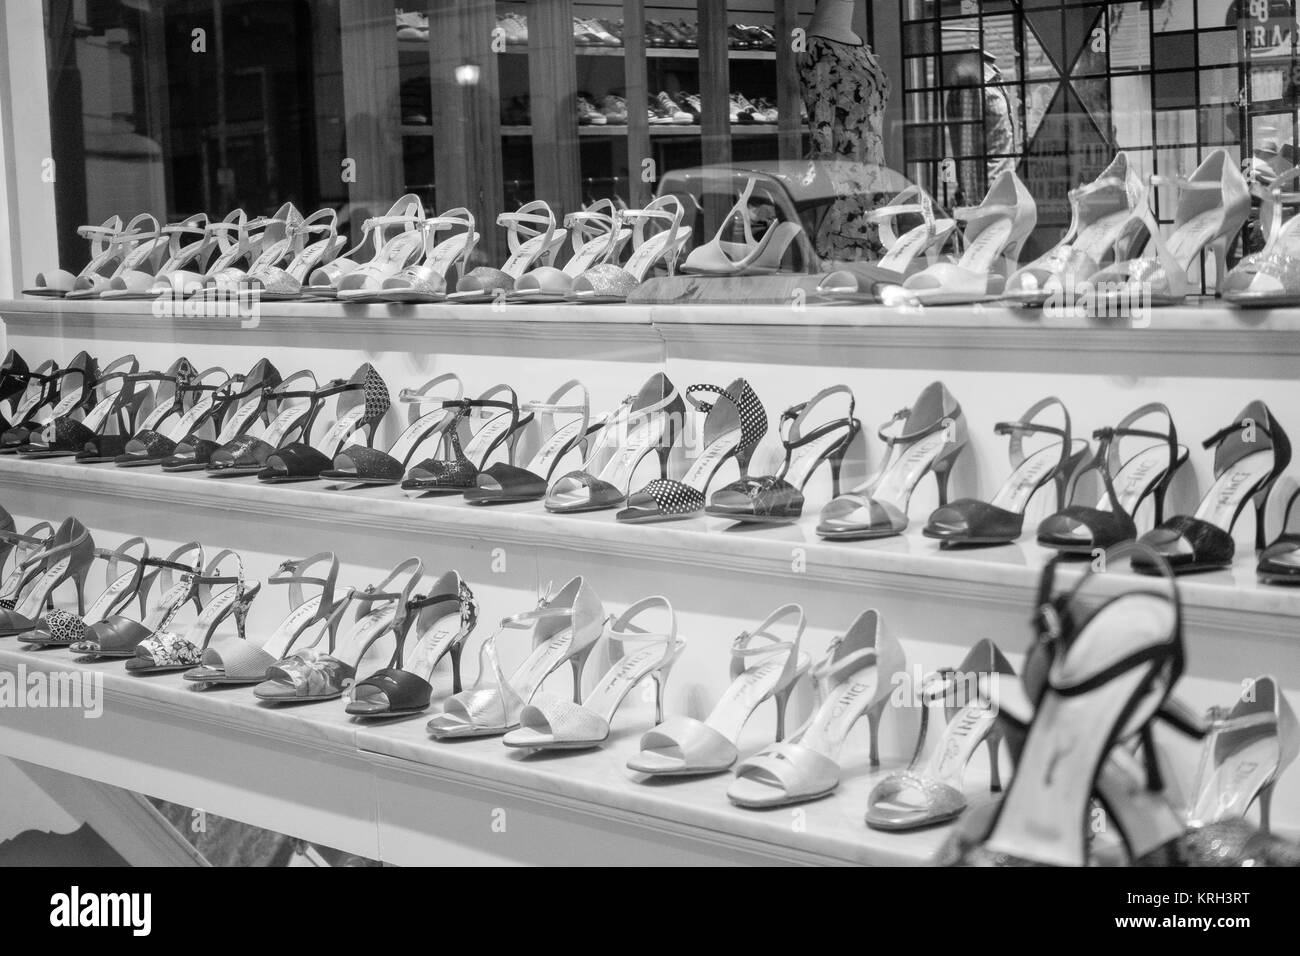 BUENOS AIRES, ARGENTINA - SEPTEMBER 20, 2017: TANGO SHOES IN STORE WINDOW IN BLACK AND WHITE. Stock Photo